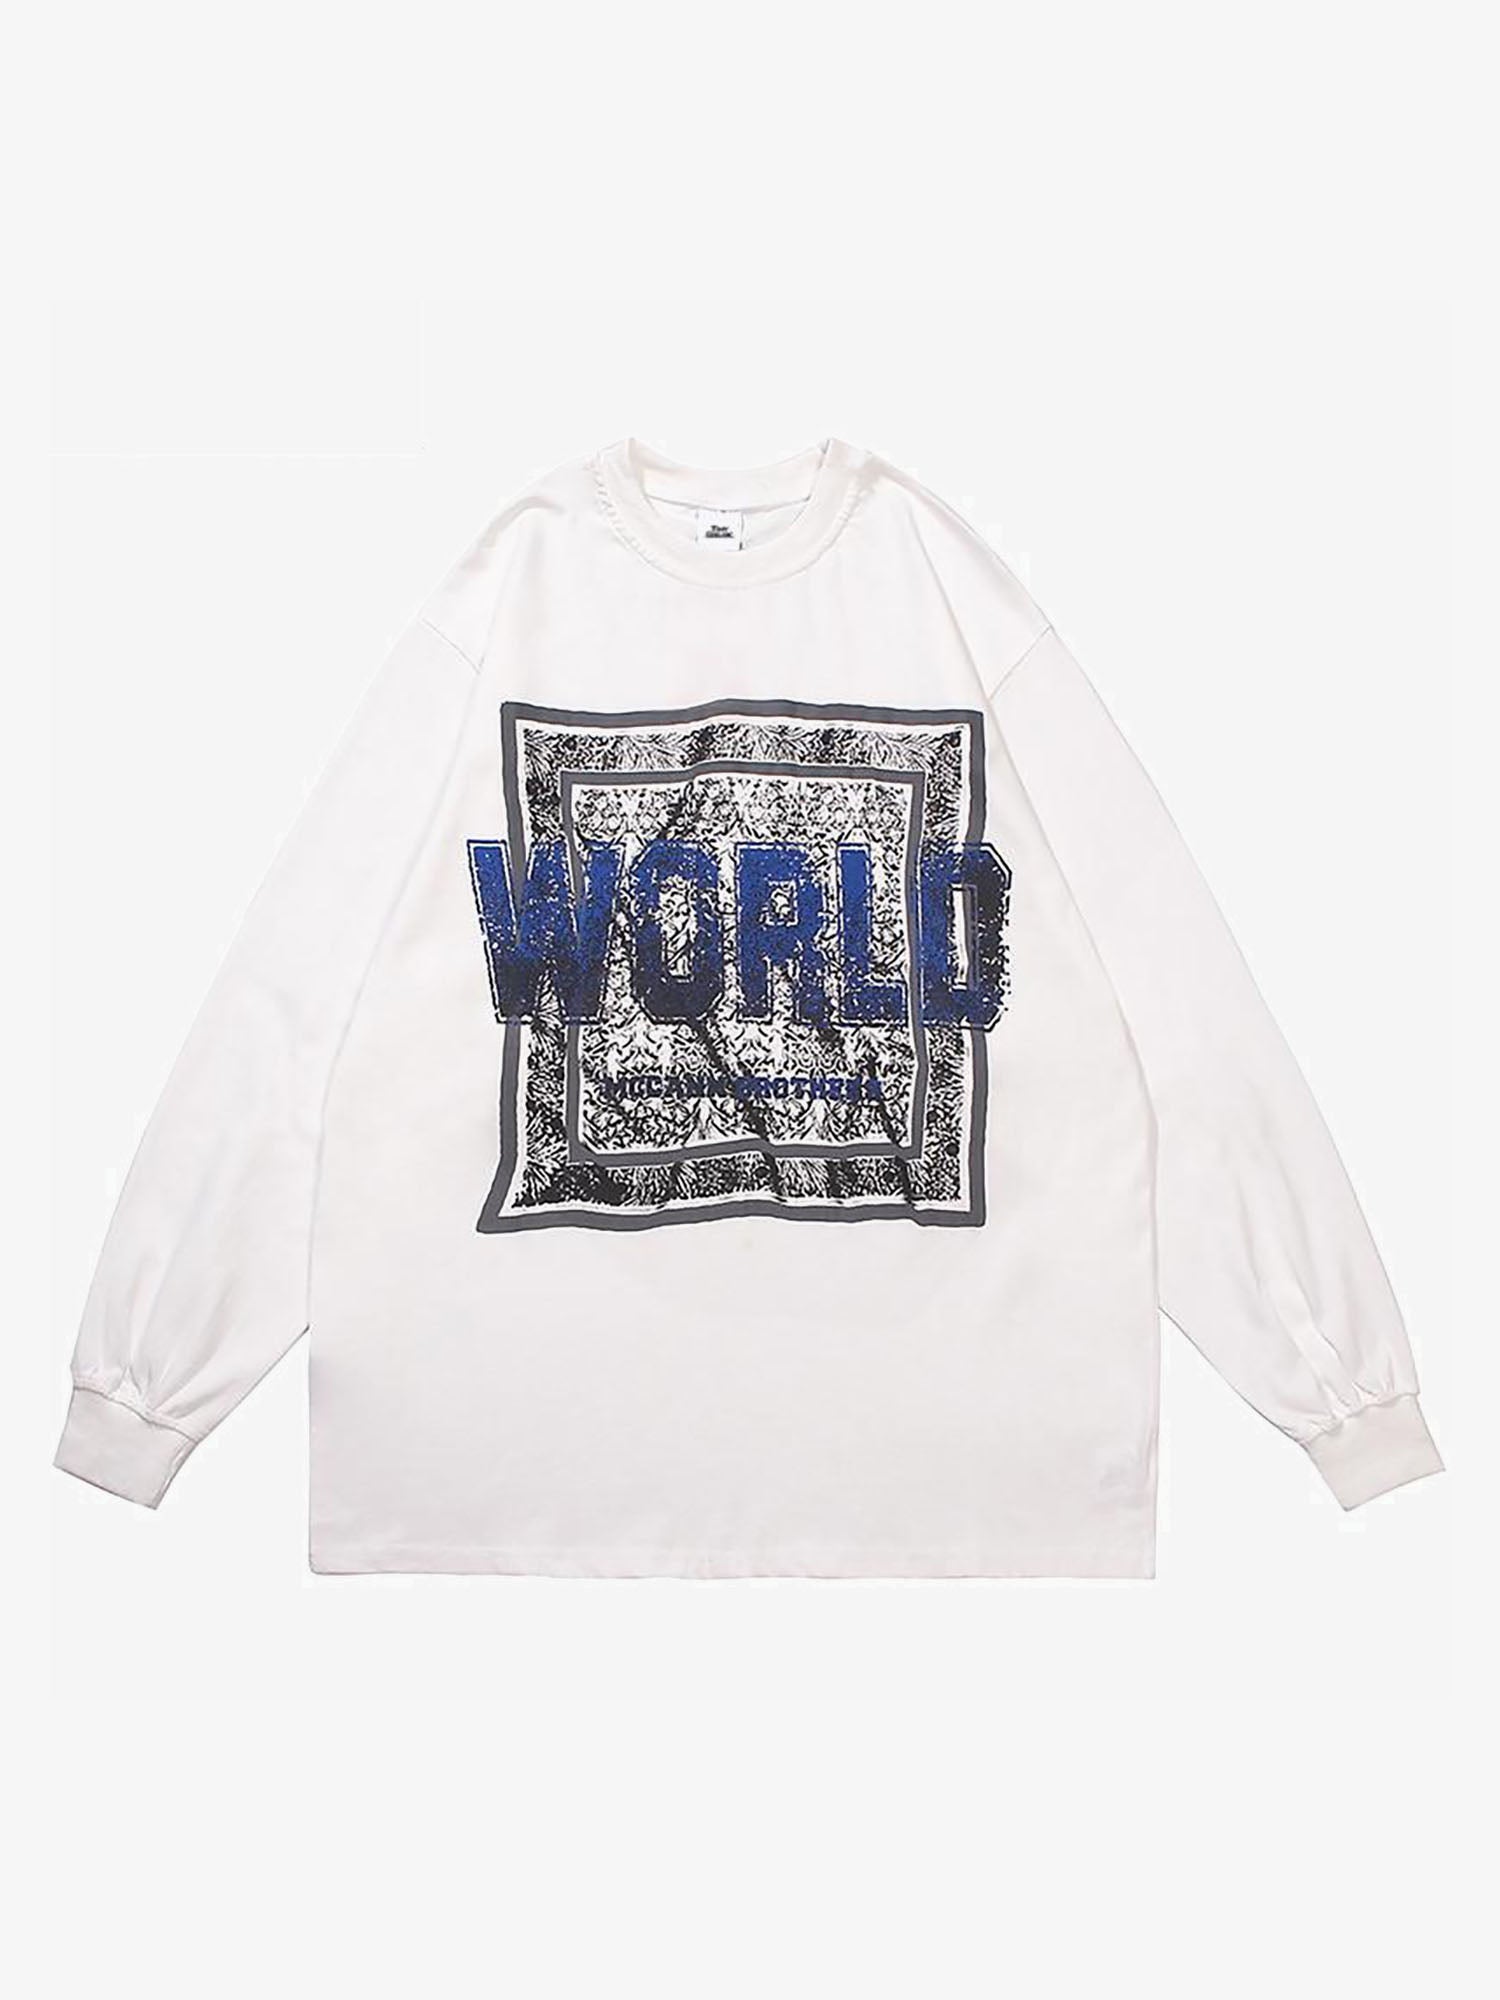 JUSTNOTAG Letter Graphic Print Long Sleeve Sweatshirts